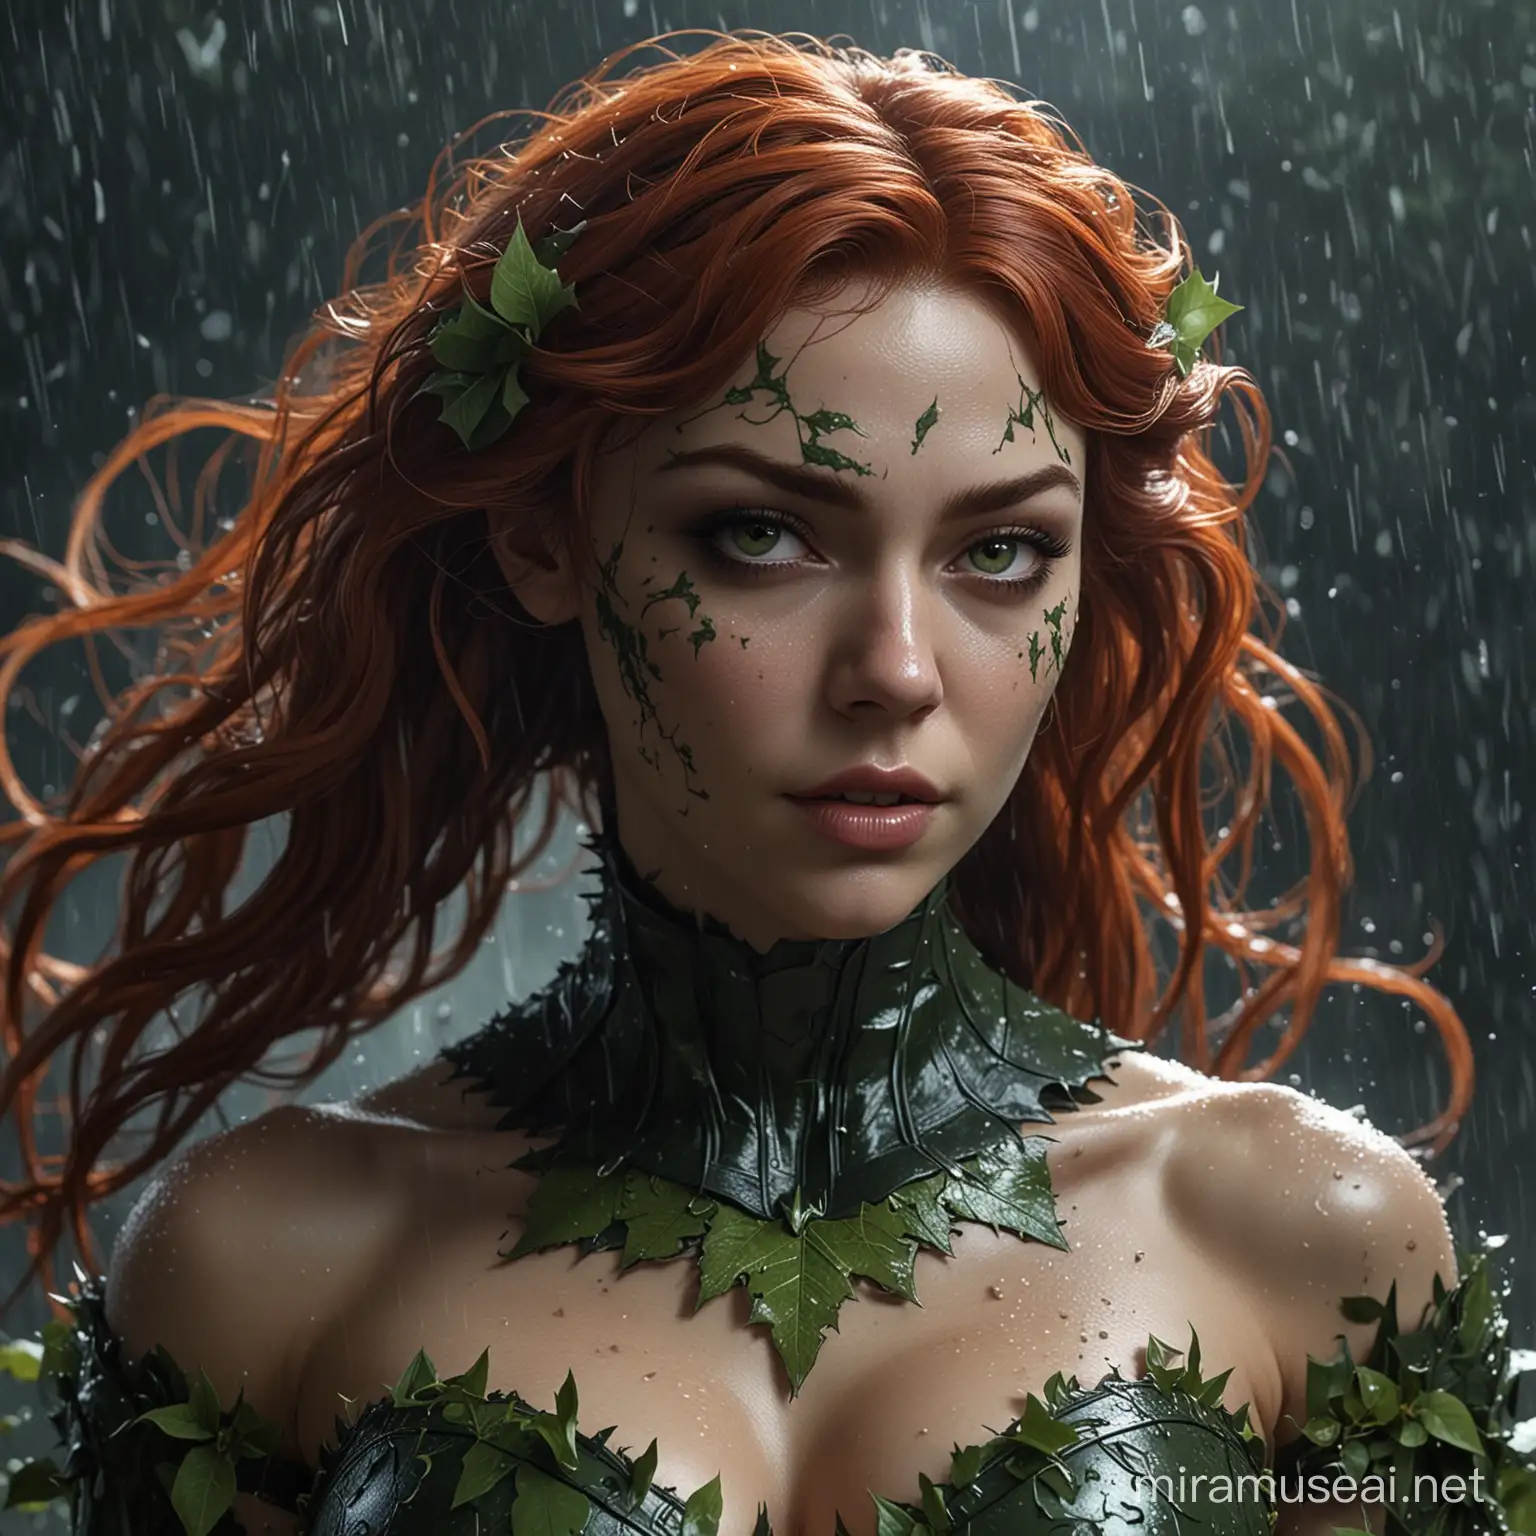 "Witness the ultimate of The Poison Ivy of The Batman, DnD, with intricate details on its face and body. The battle cry echoes through the stormy night, with thunder and rain adding to the intensity of this 4k resolution image."